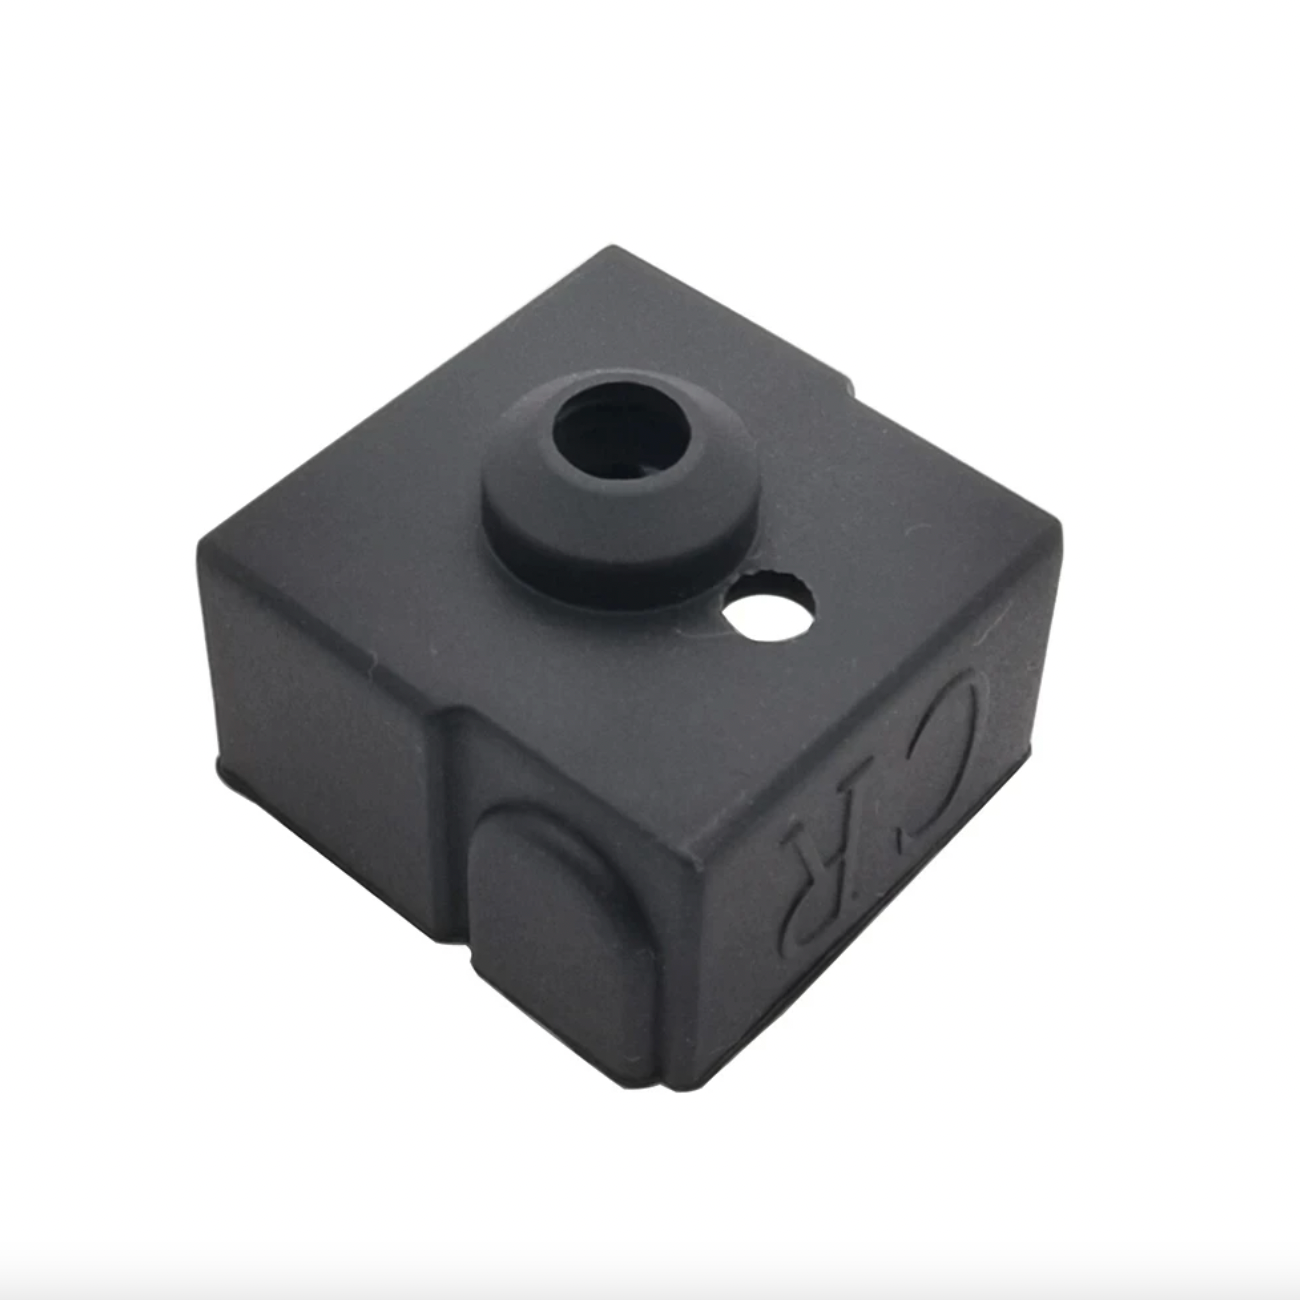 Creality CR-5/6/10 Pro H/SE/Smart Hotend Silicone Sock - 3 Pack - Also Fits CR-200B, CT-380, CR-5060